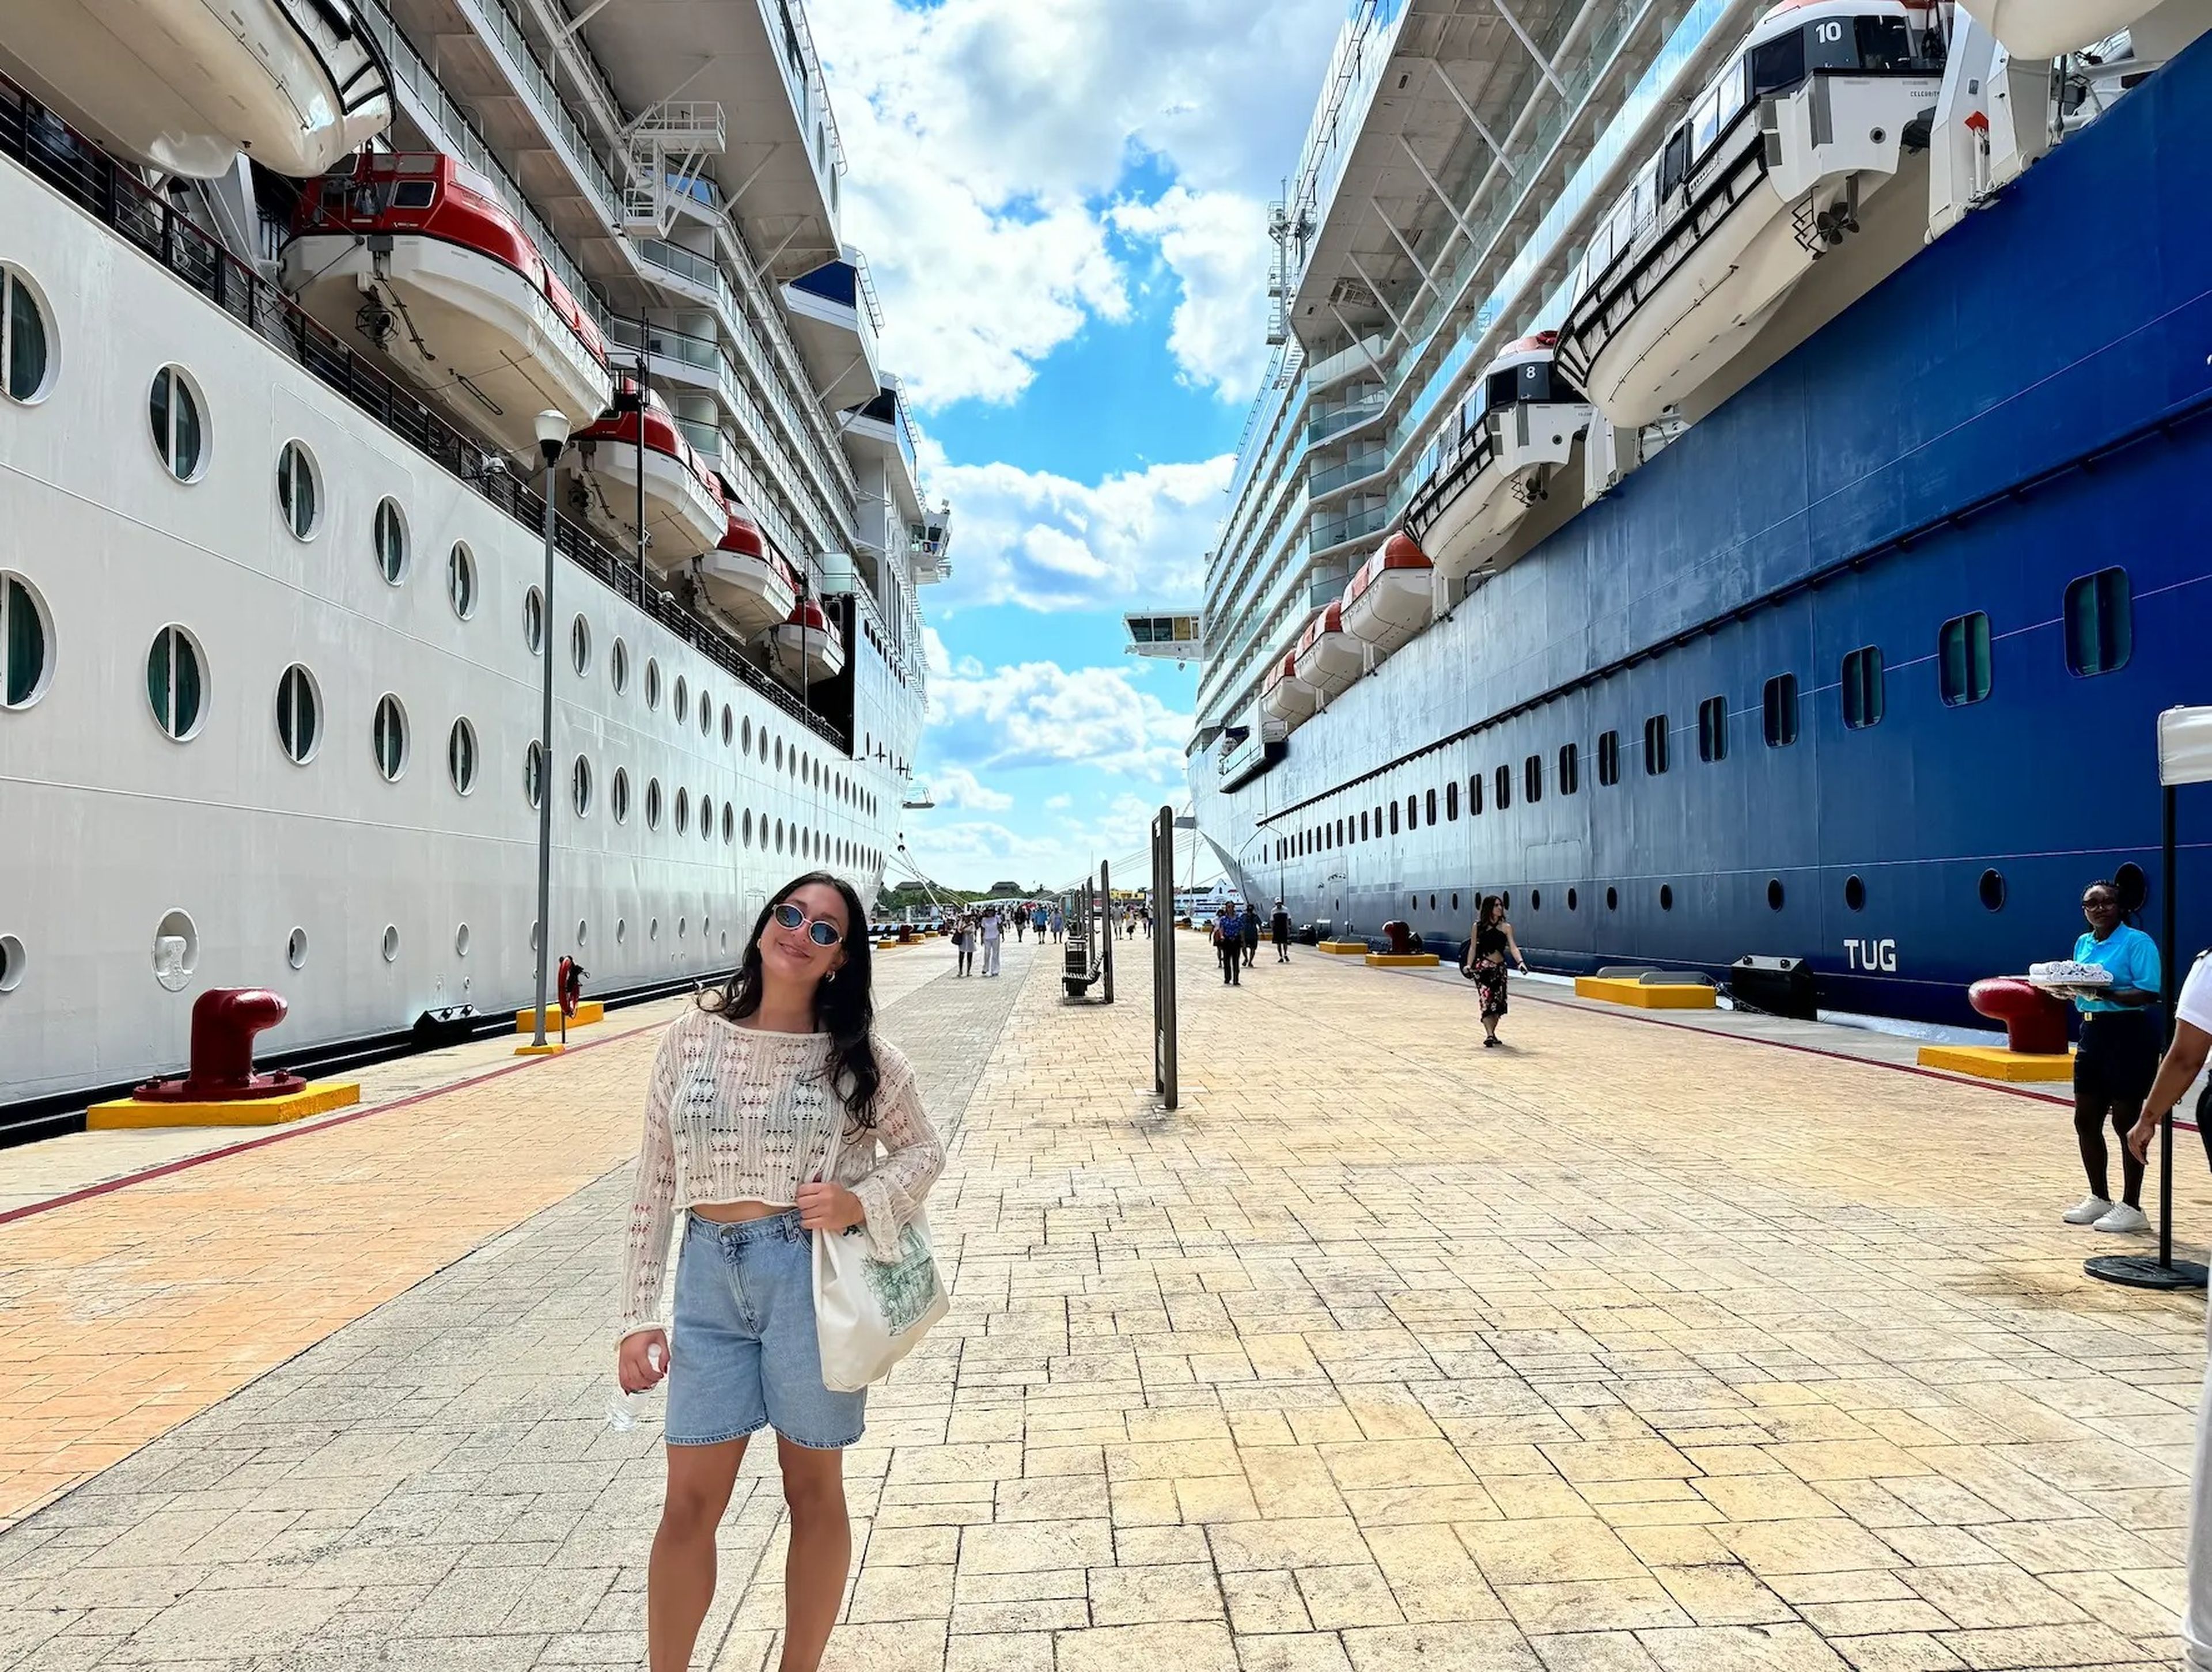 Jordana Comiter posing on a port in between two docked cruise ships